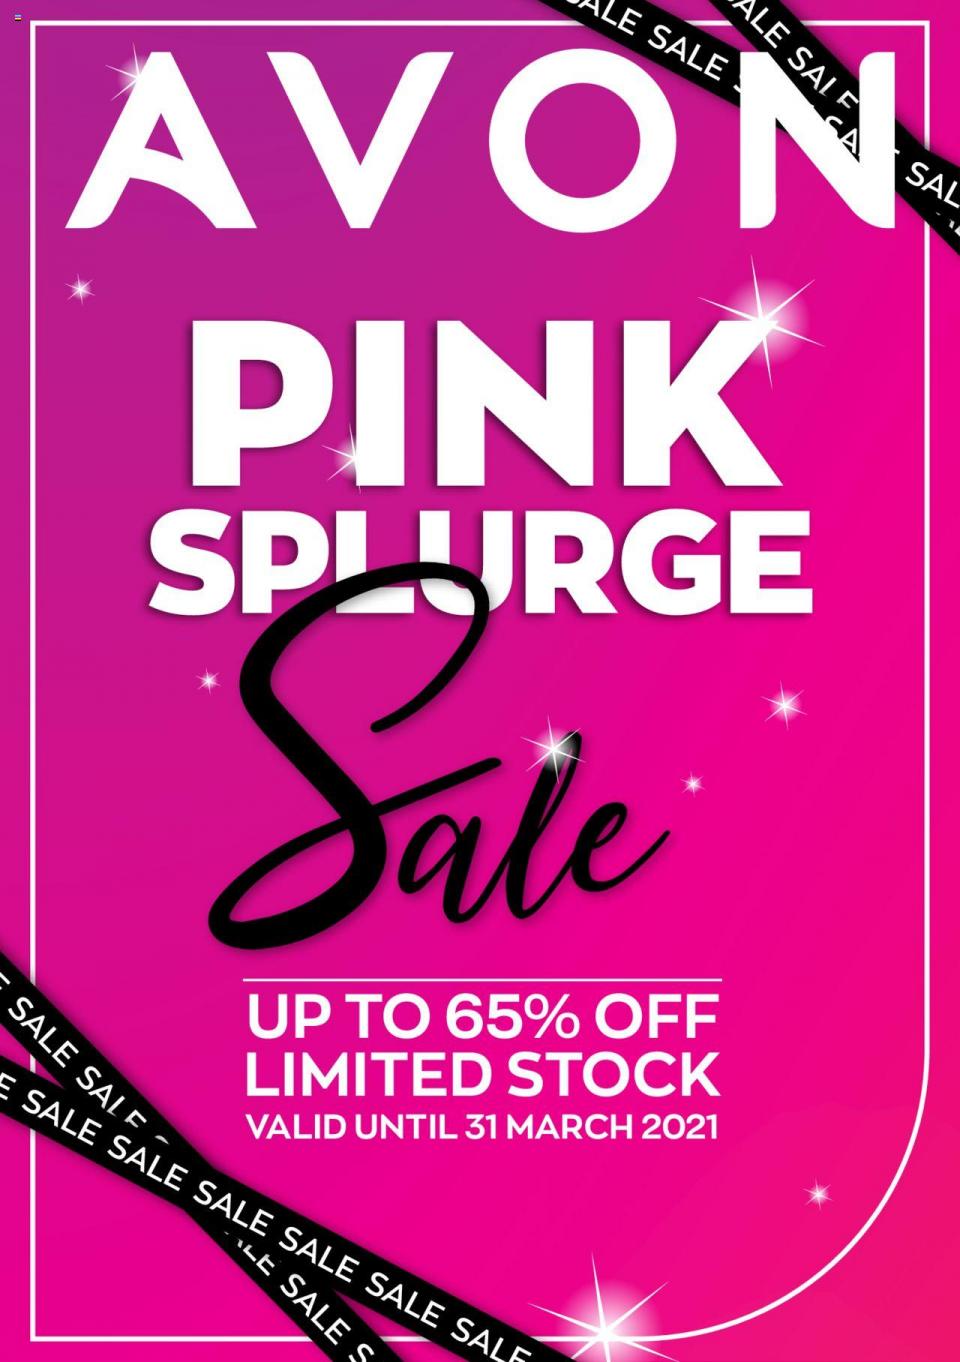 Avon Brochure Pink Splurge Up To 65% OFF 23 – 31 March 2021